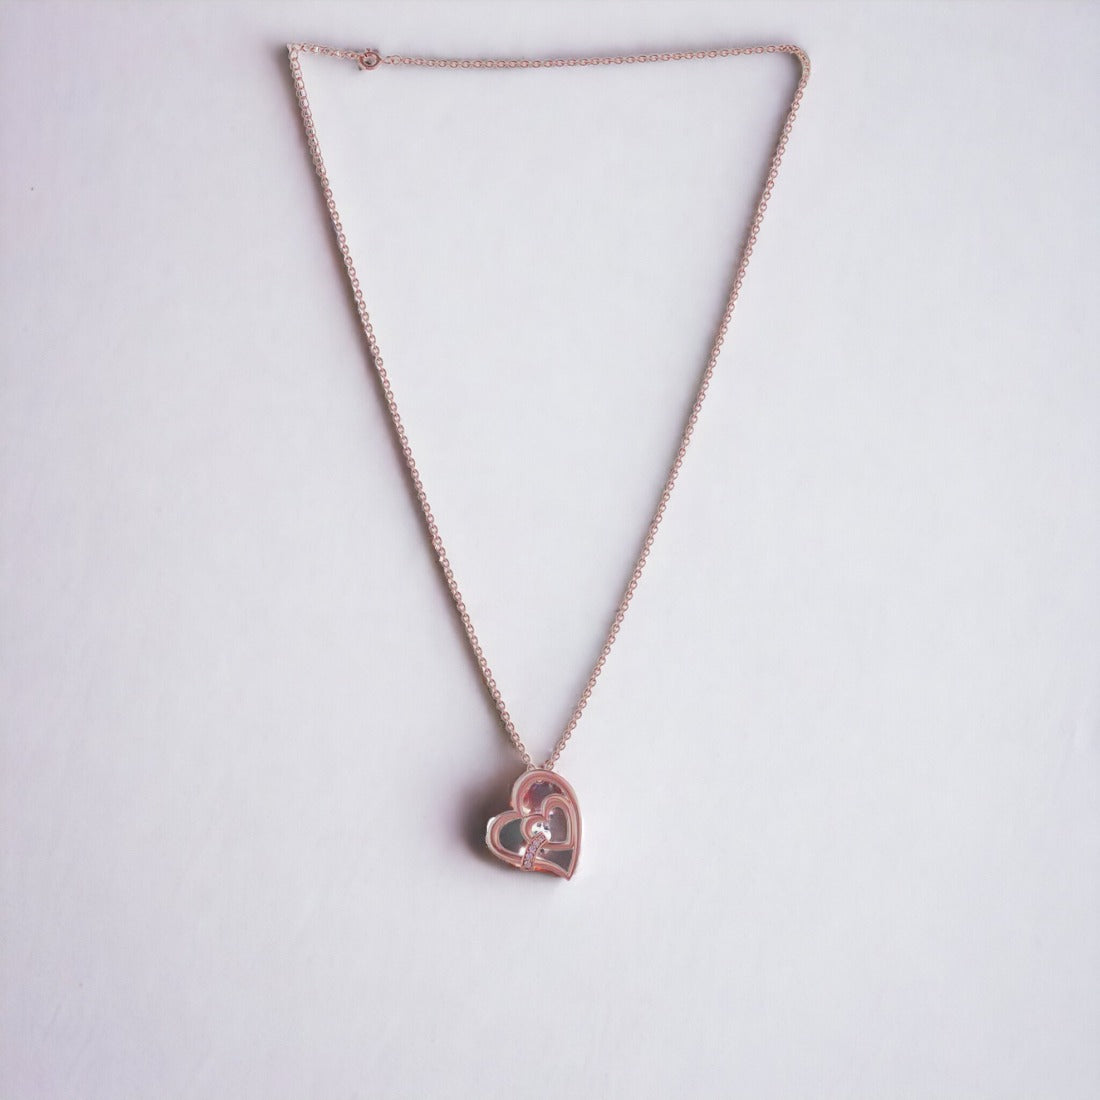 Rosegold Heart Pendant With Chain For Women & Girls